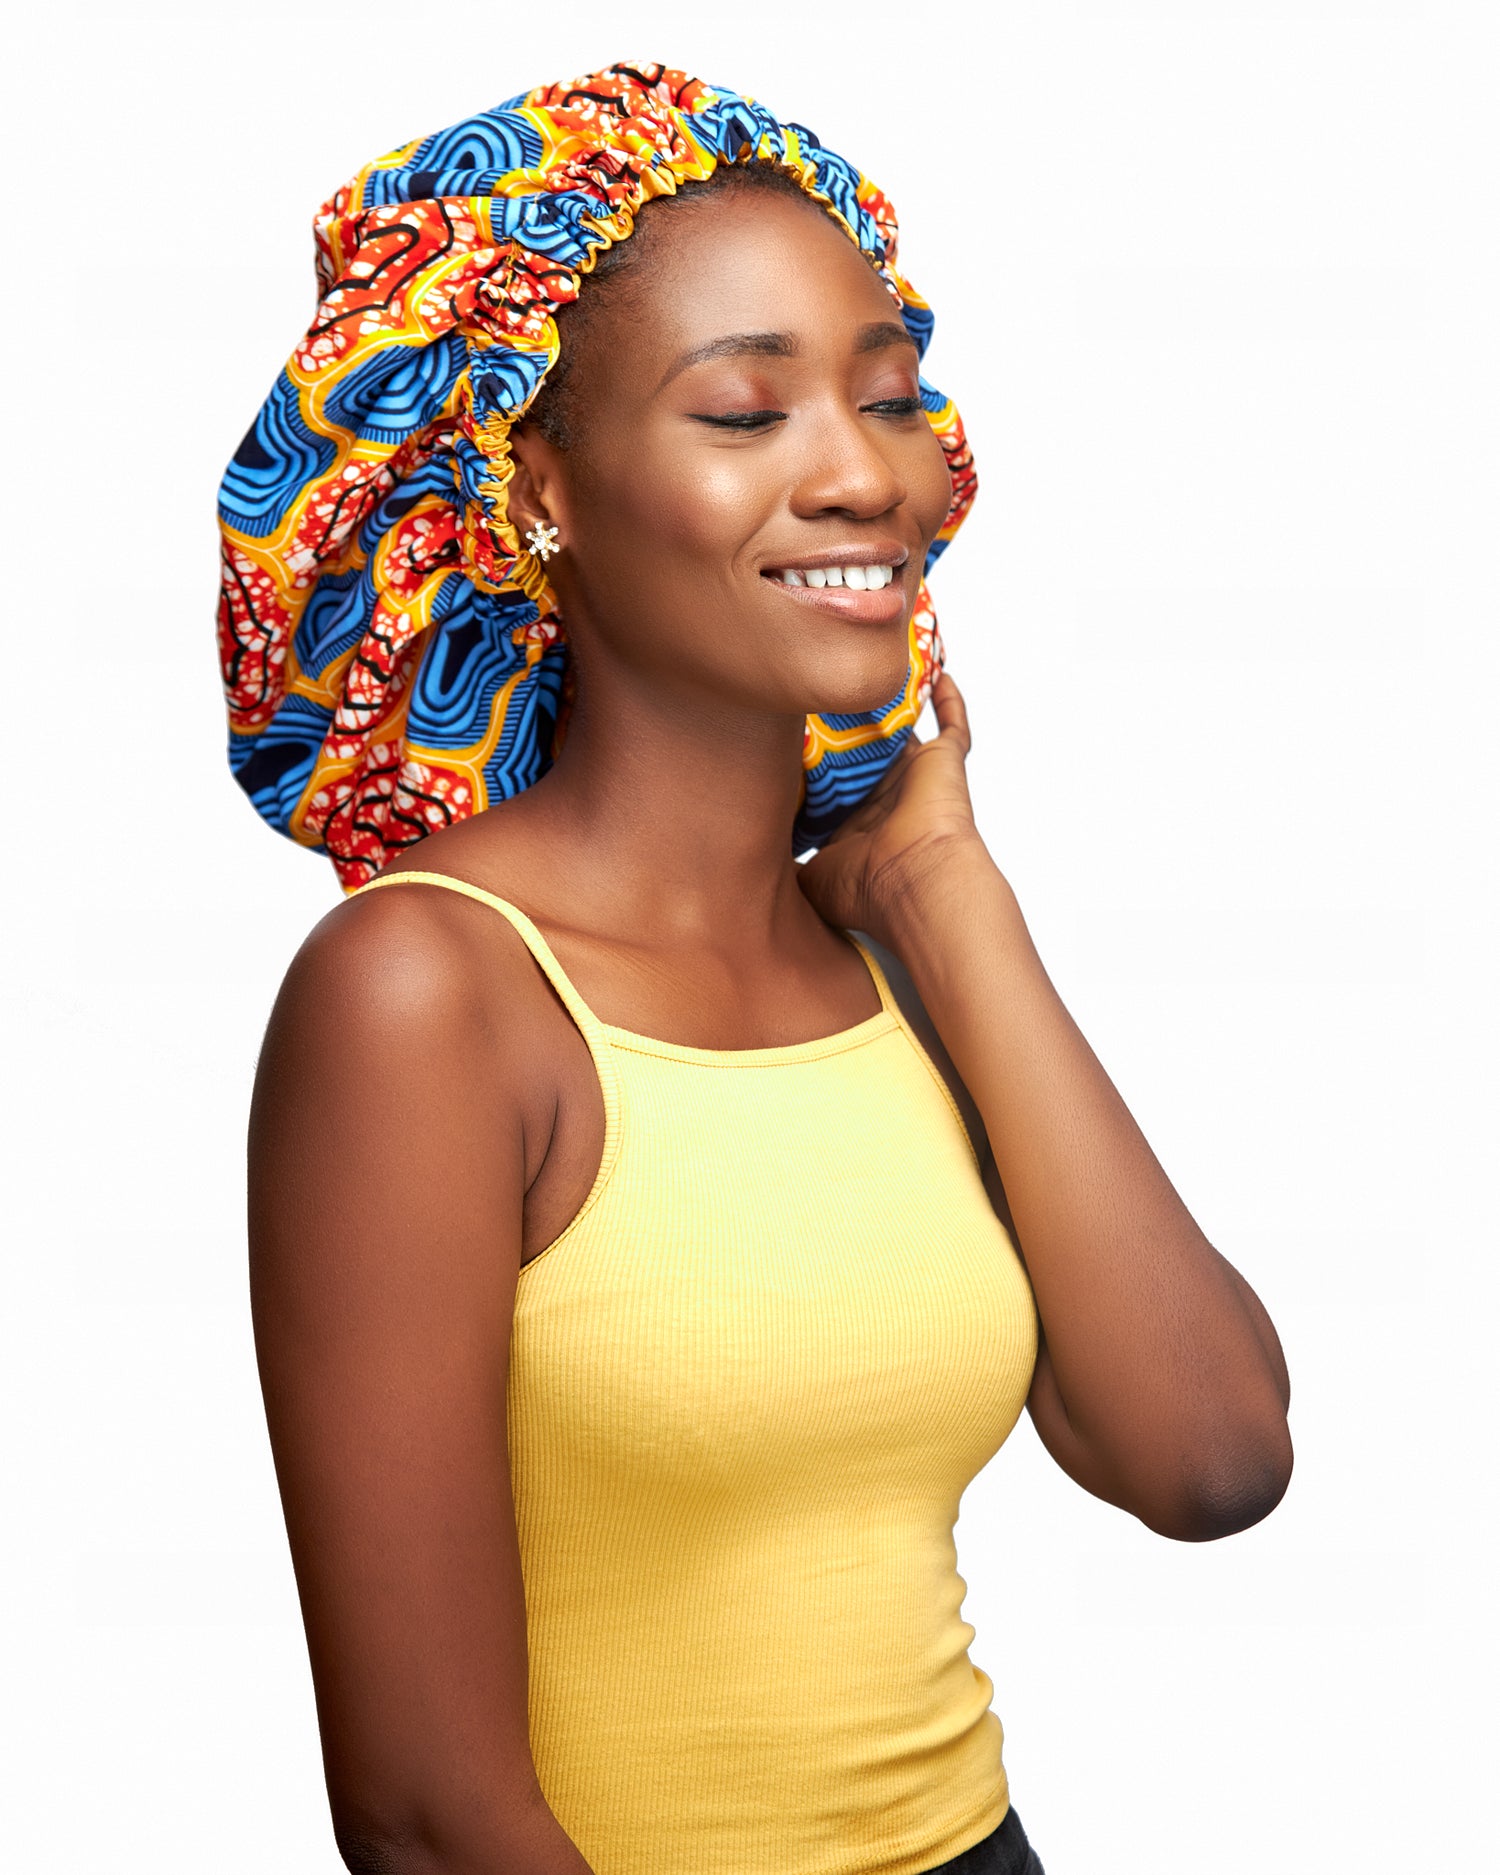 An Ankara Wax Print Made of Orange,White, Yellow, Seablue And Black Blend of Beautiful Colours And Pattern, Hand Made Elastic With Yellow Silk lined Hair Bonnet